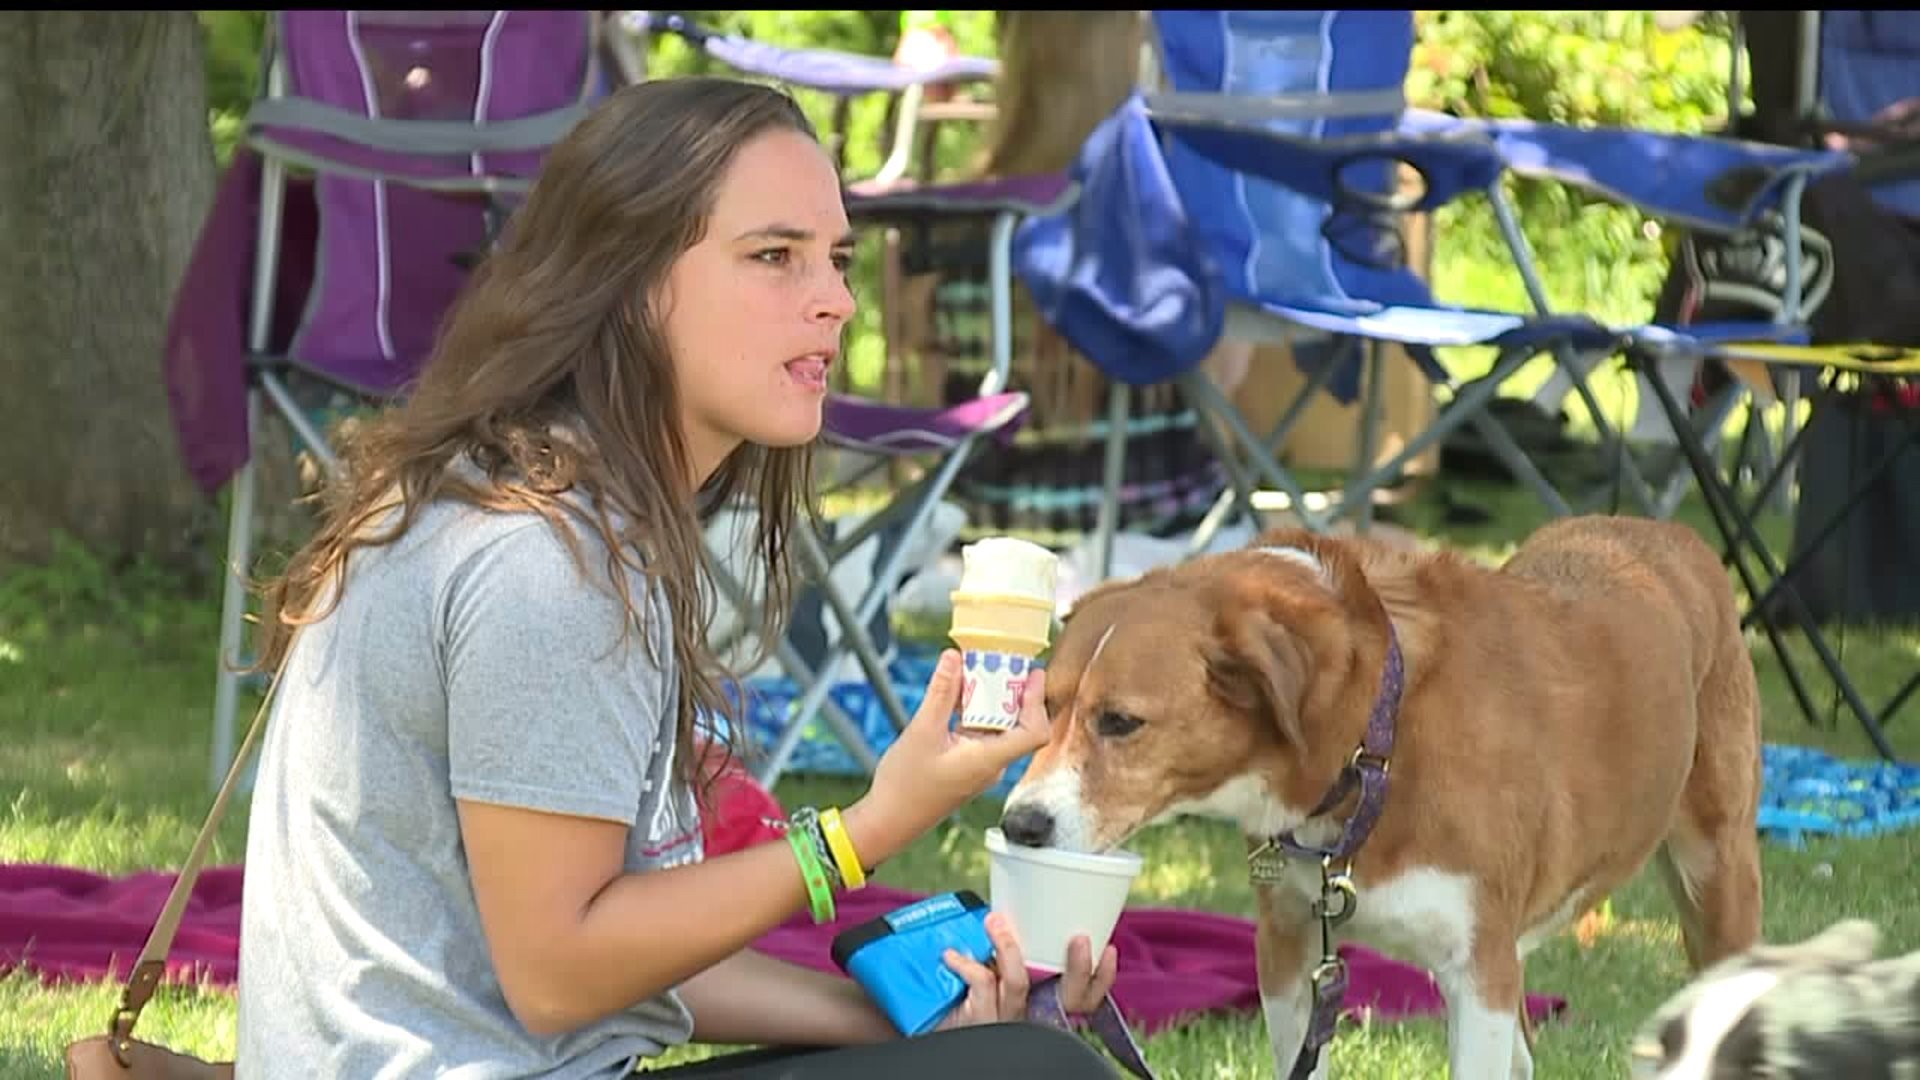 Perry County Animal Rescue holds ‘Barks and Brews’ event | fox43.com